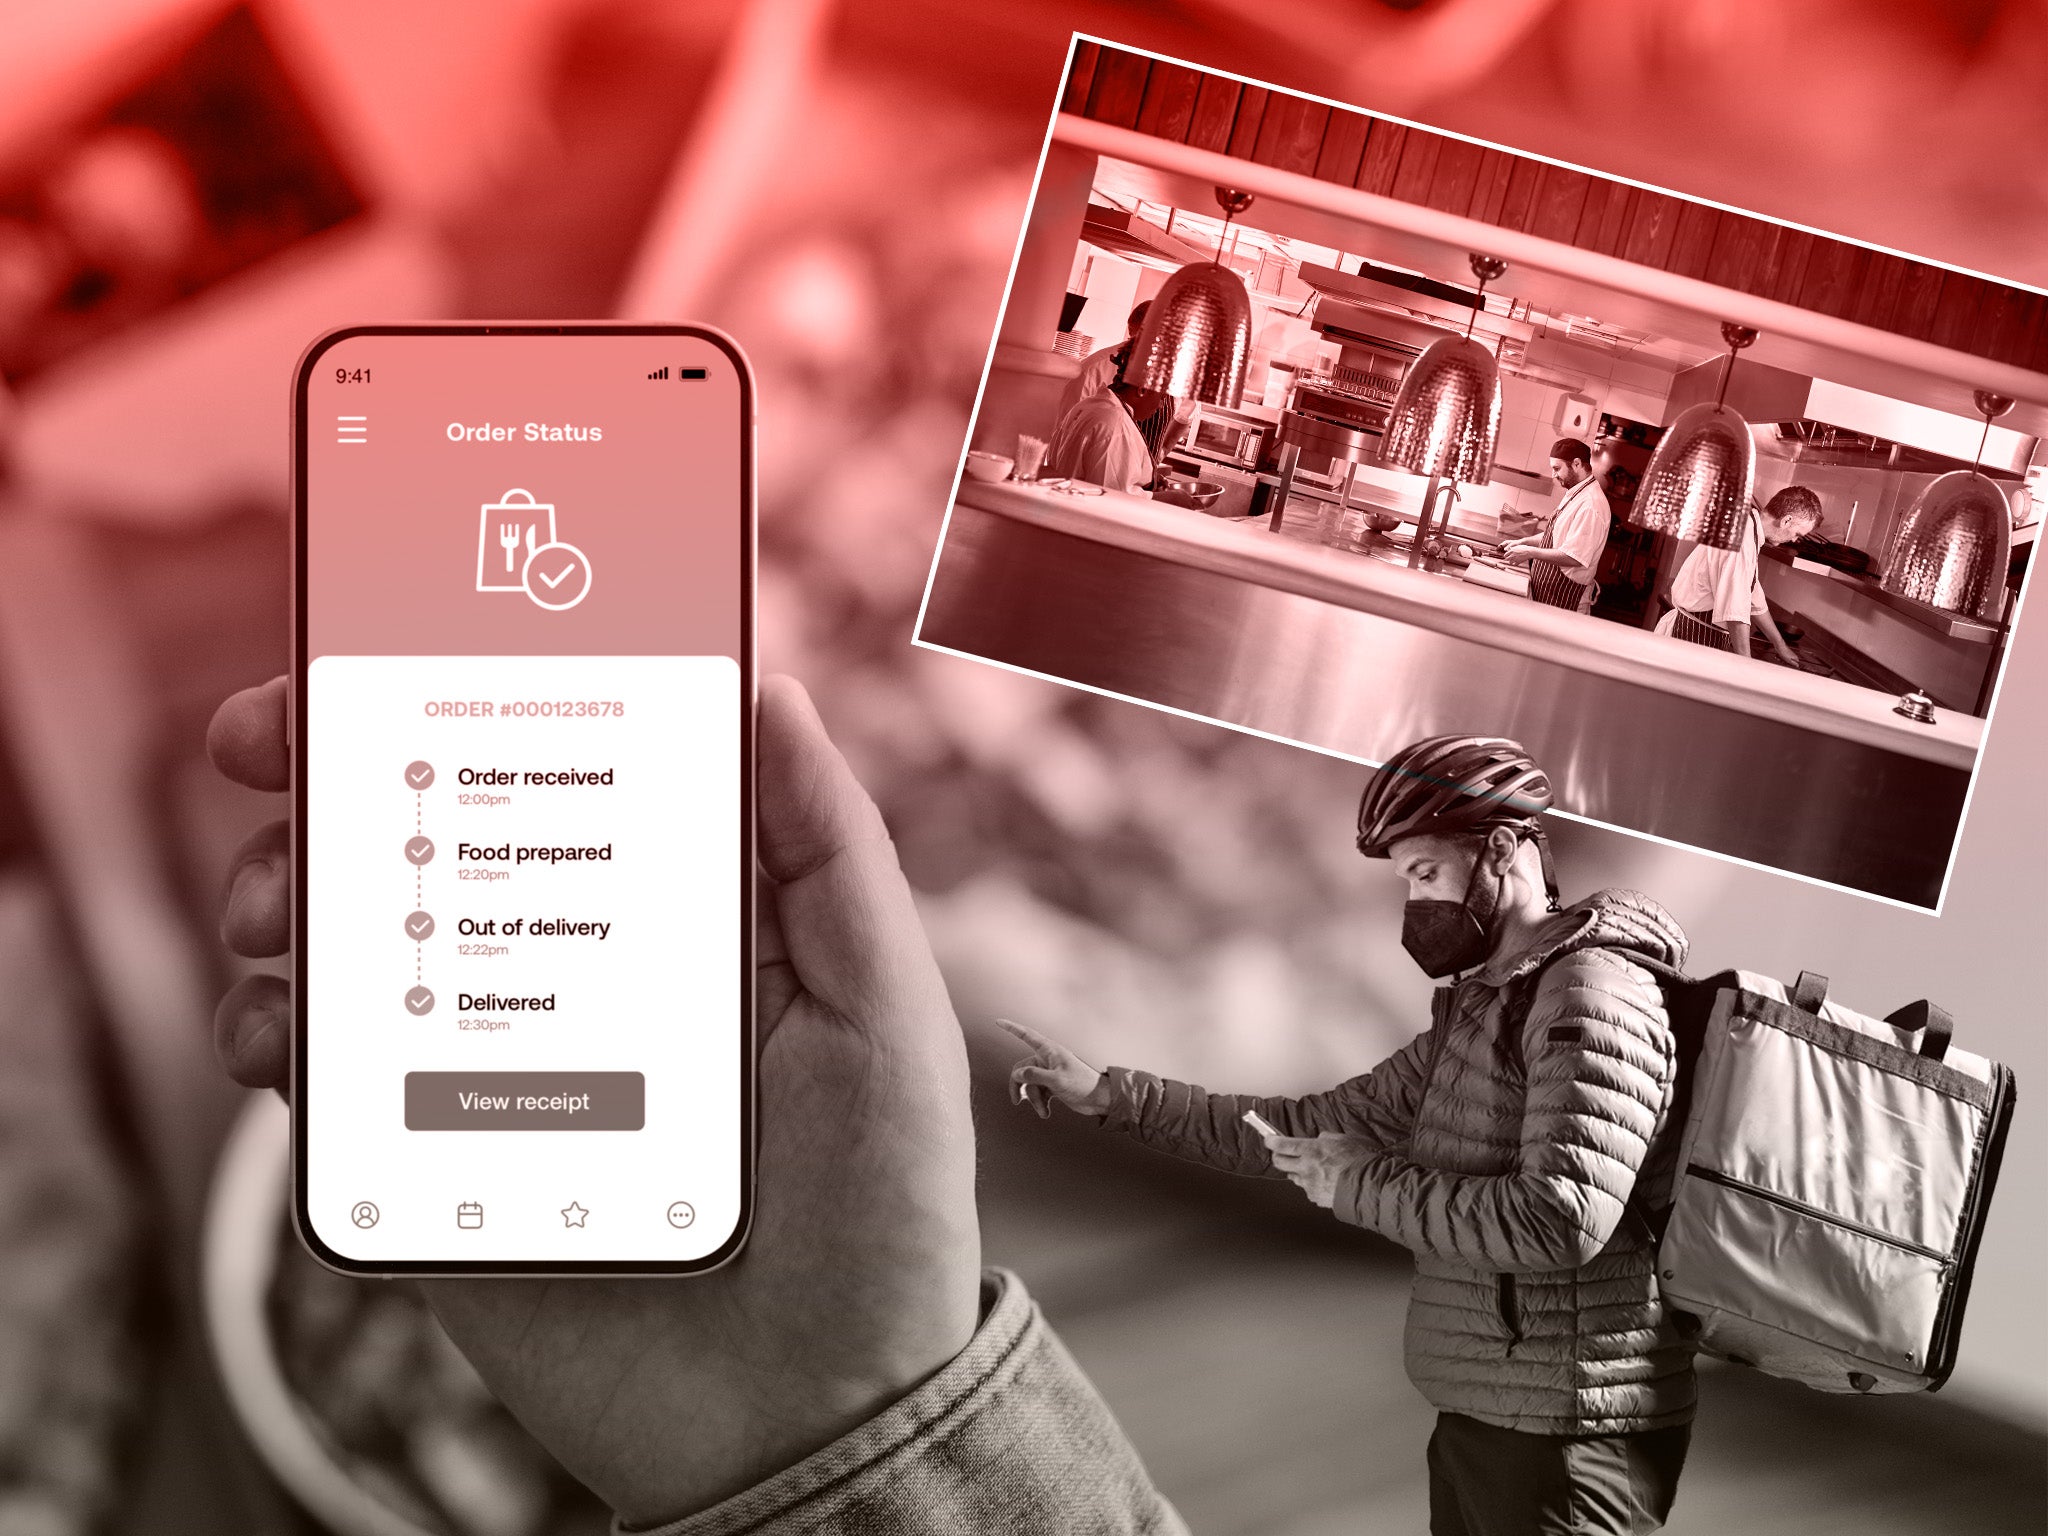 DoorDash adds safety features to help protect delivery drivers